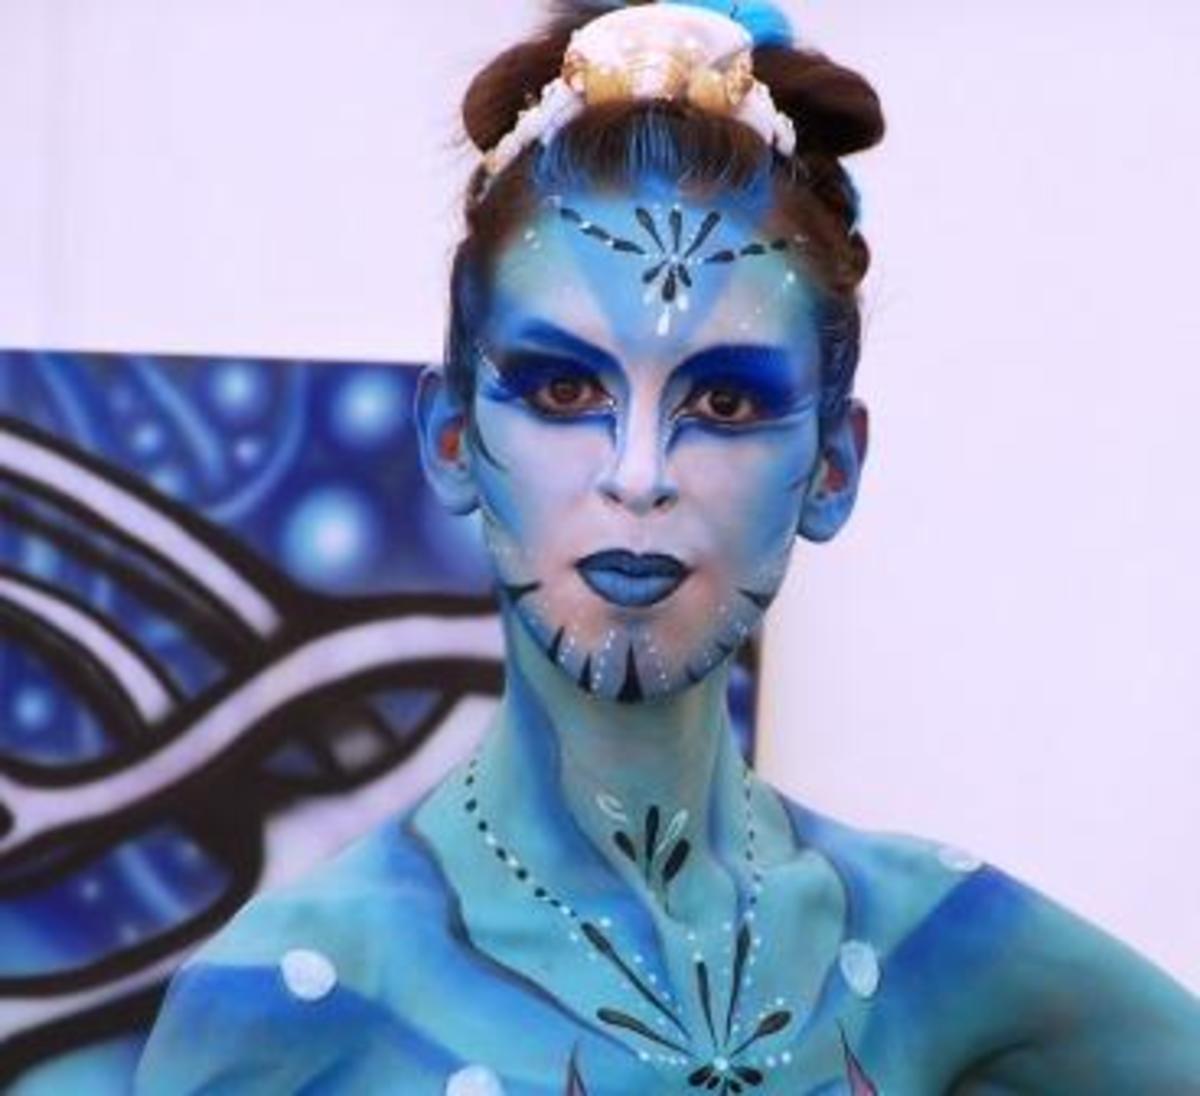 Accomplished by using an airbrush and body painting 